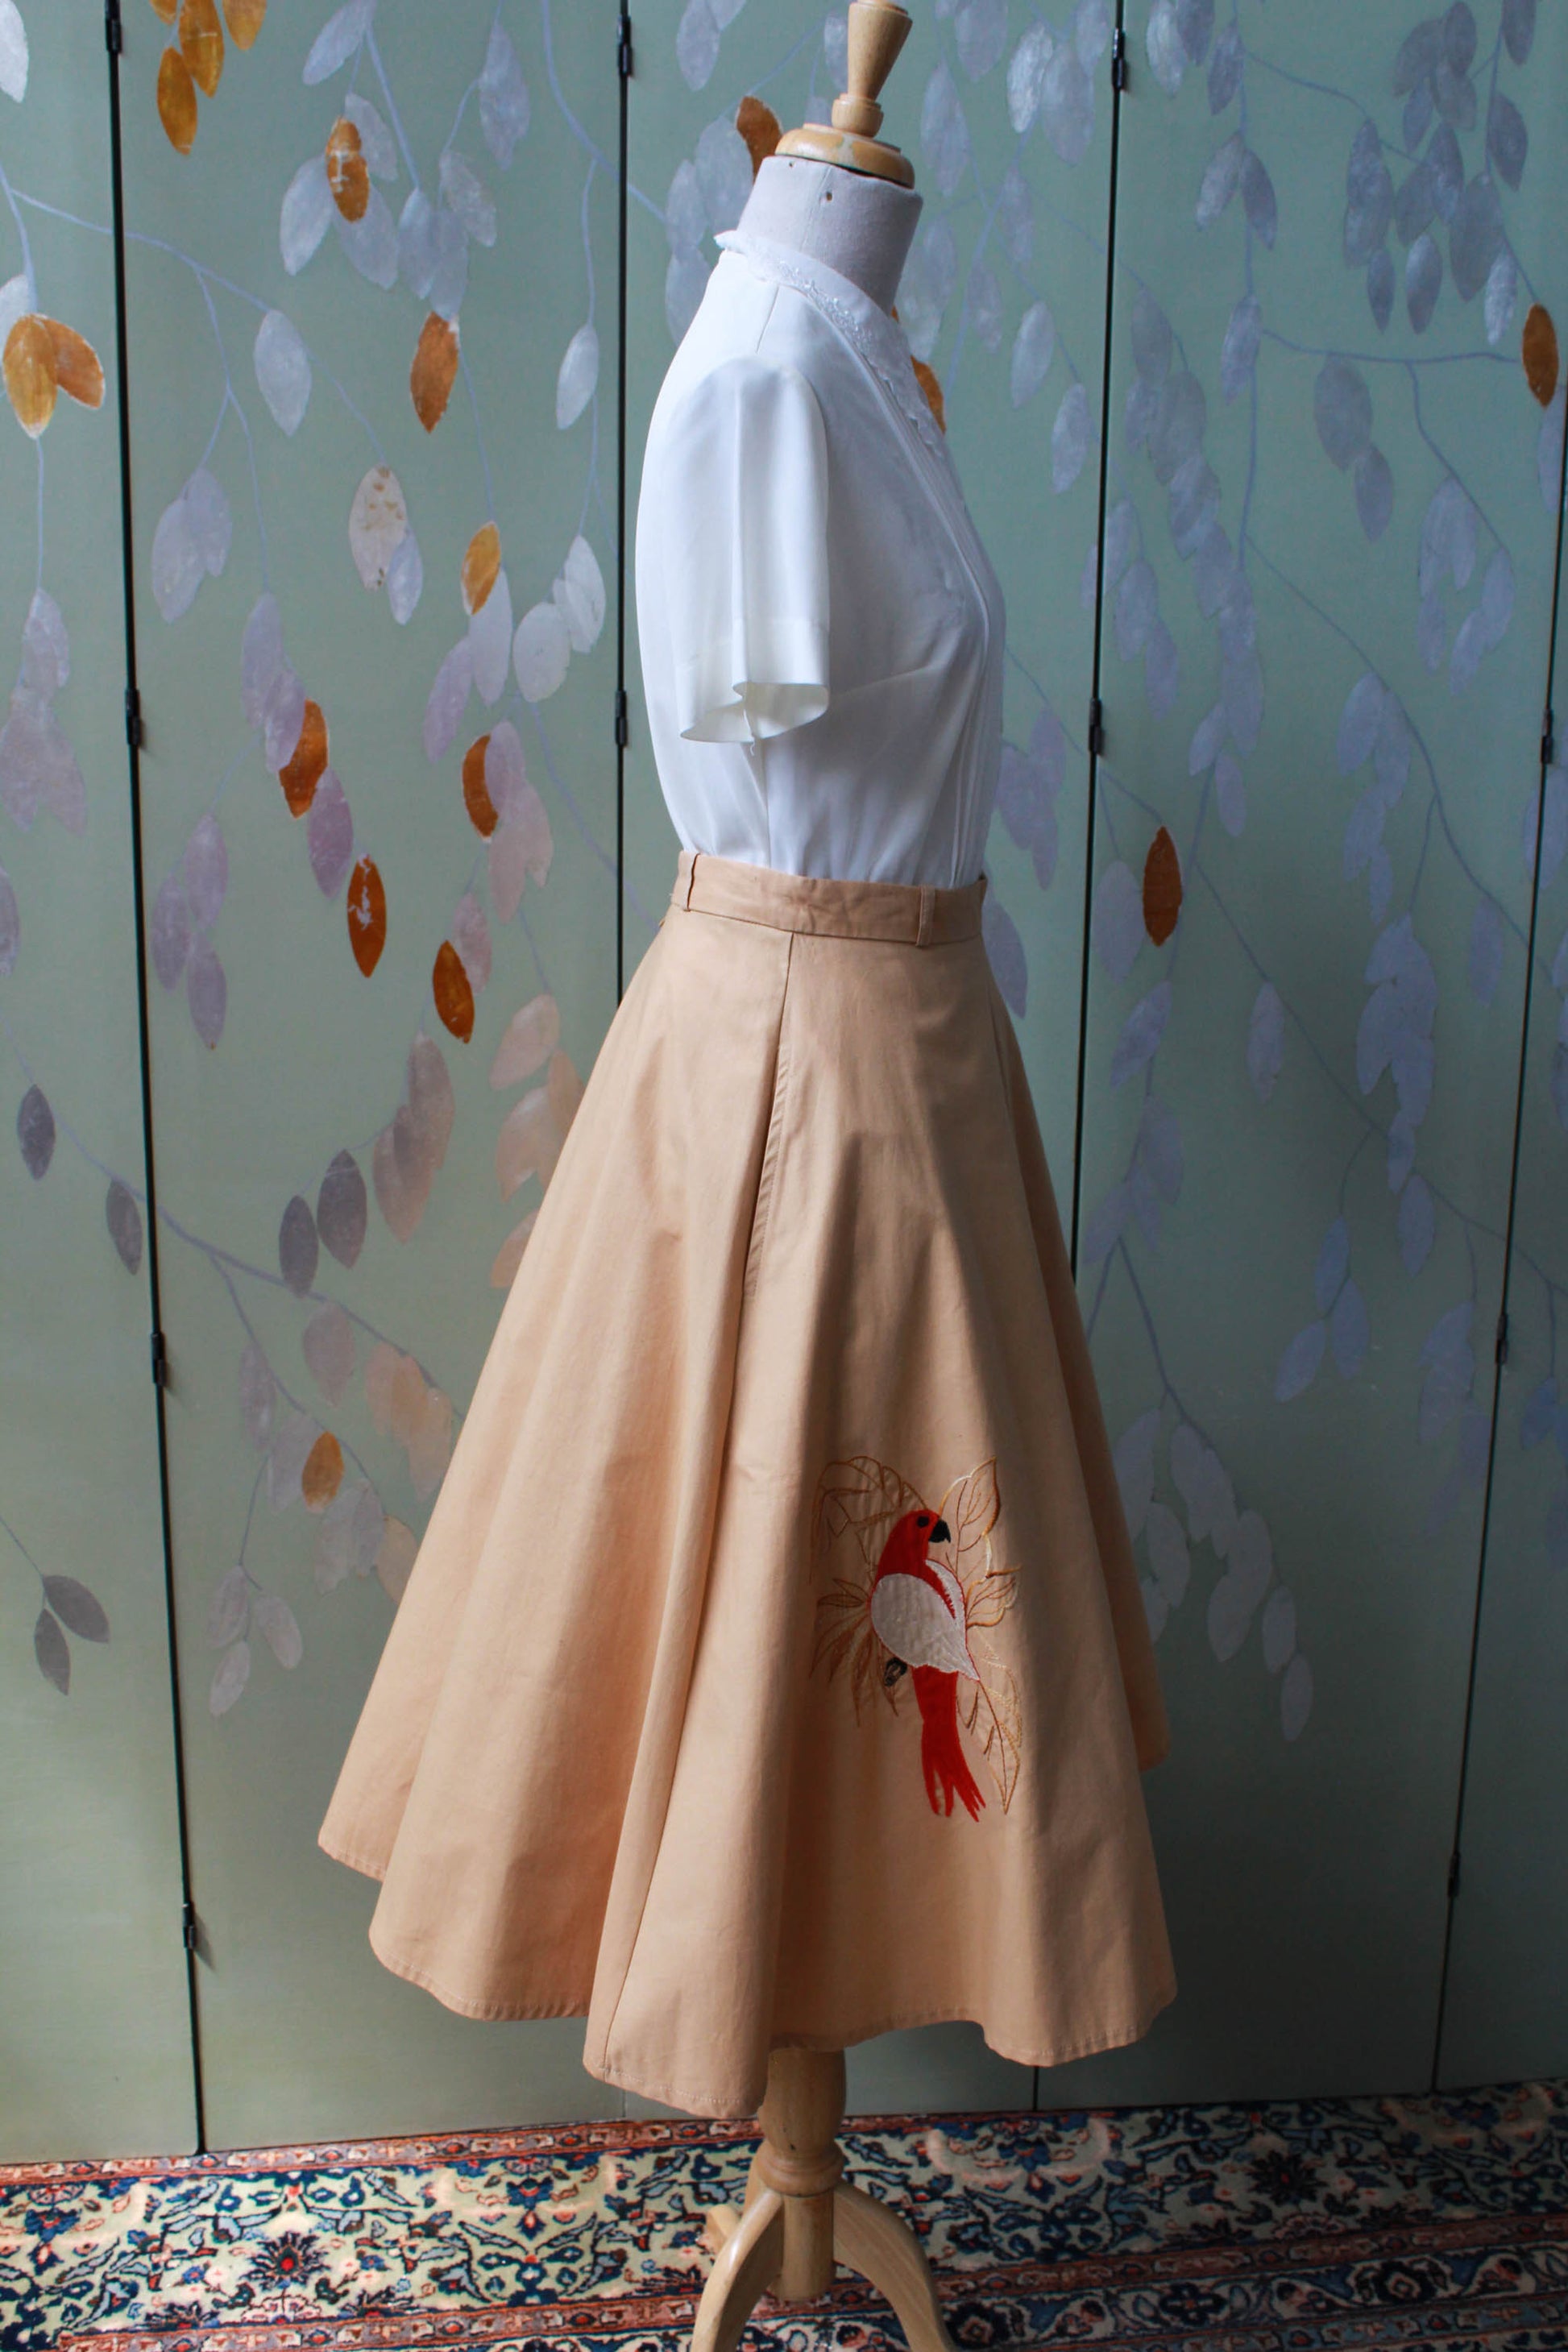 1970s 50s style circle skirt with parrot applique, high waisted, cotton resort skirt Made in France by Catherine I for Philippe Salvet St Tropez Nice